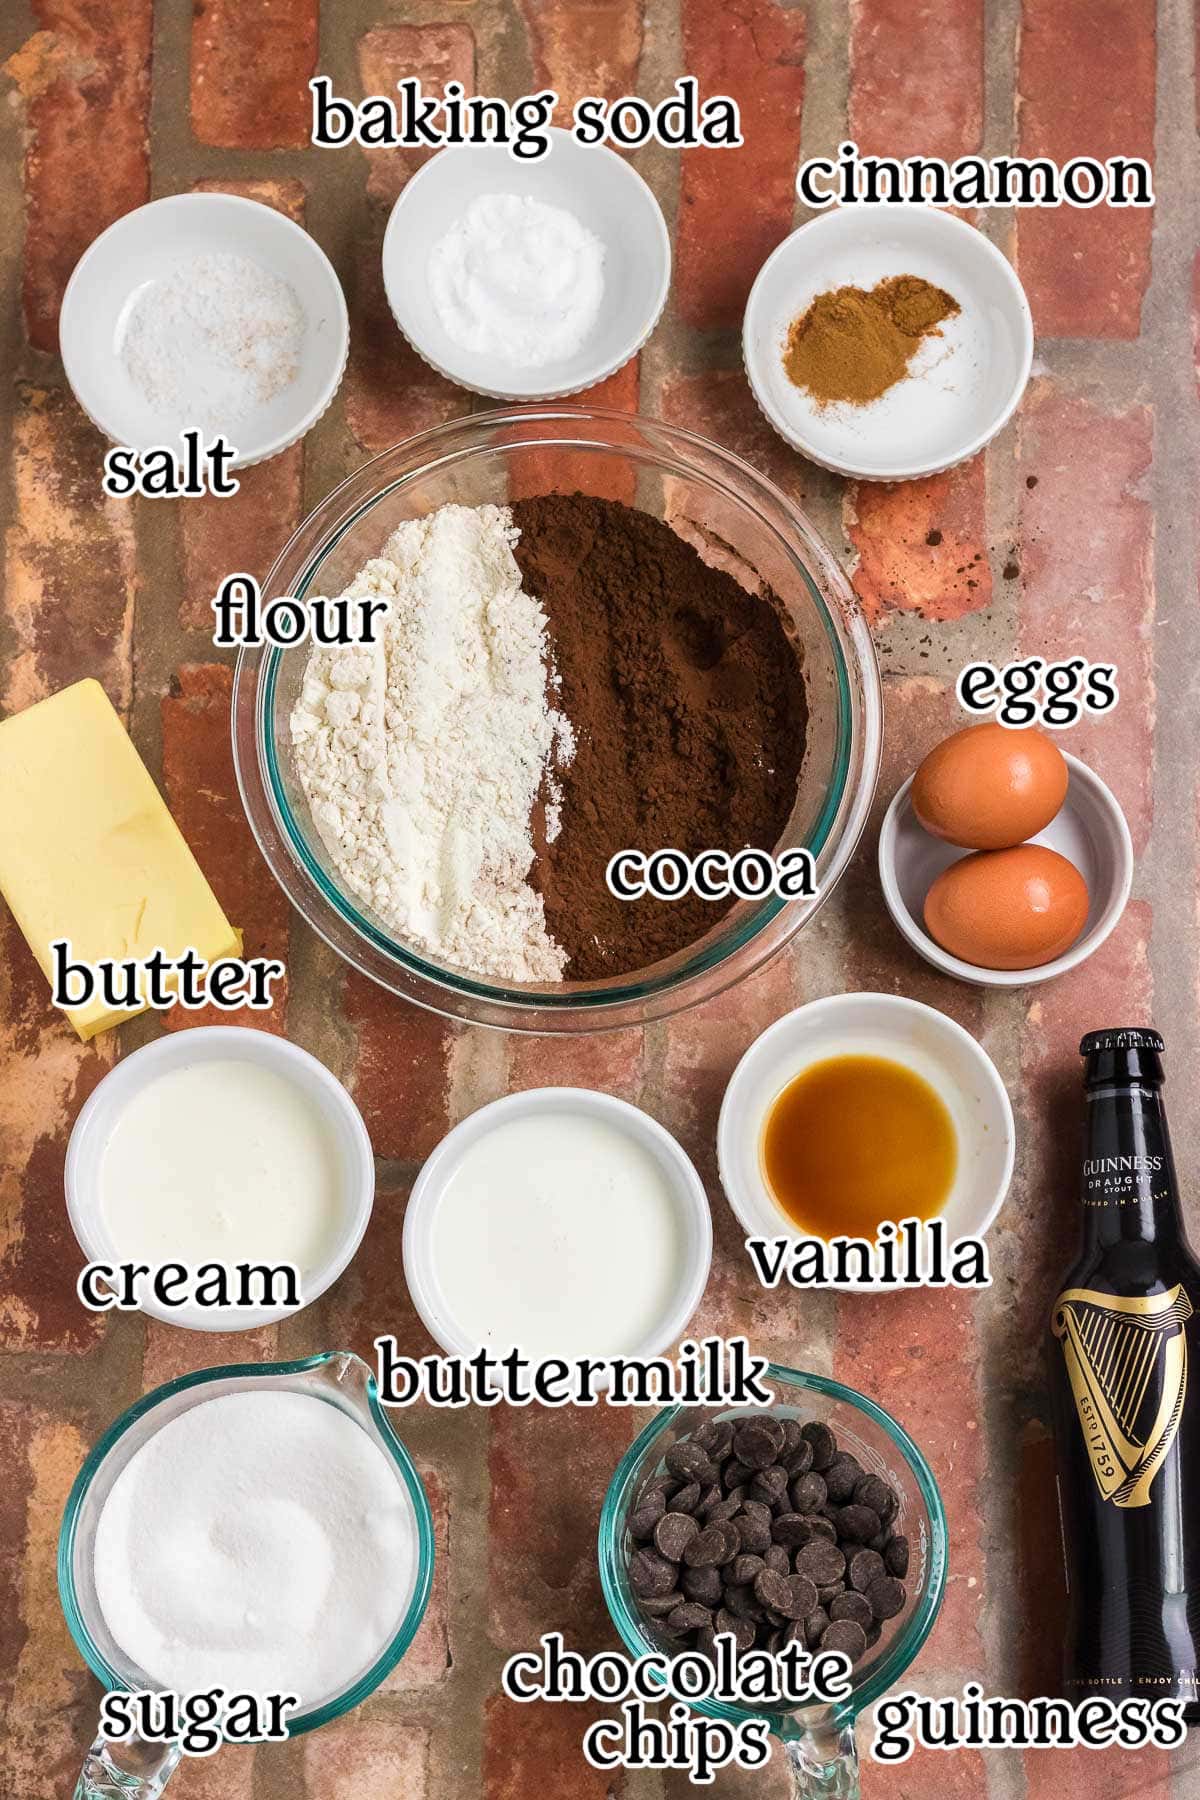 Ingredients for Guinness Chocolate Bundt Cake.